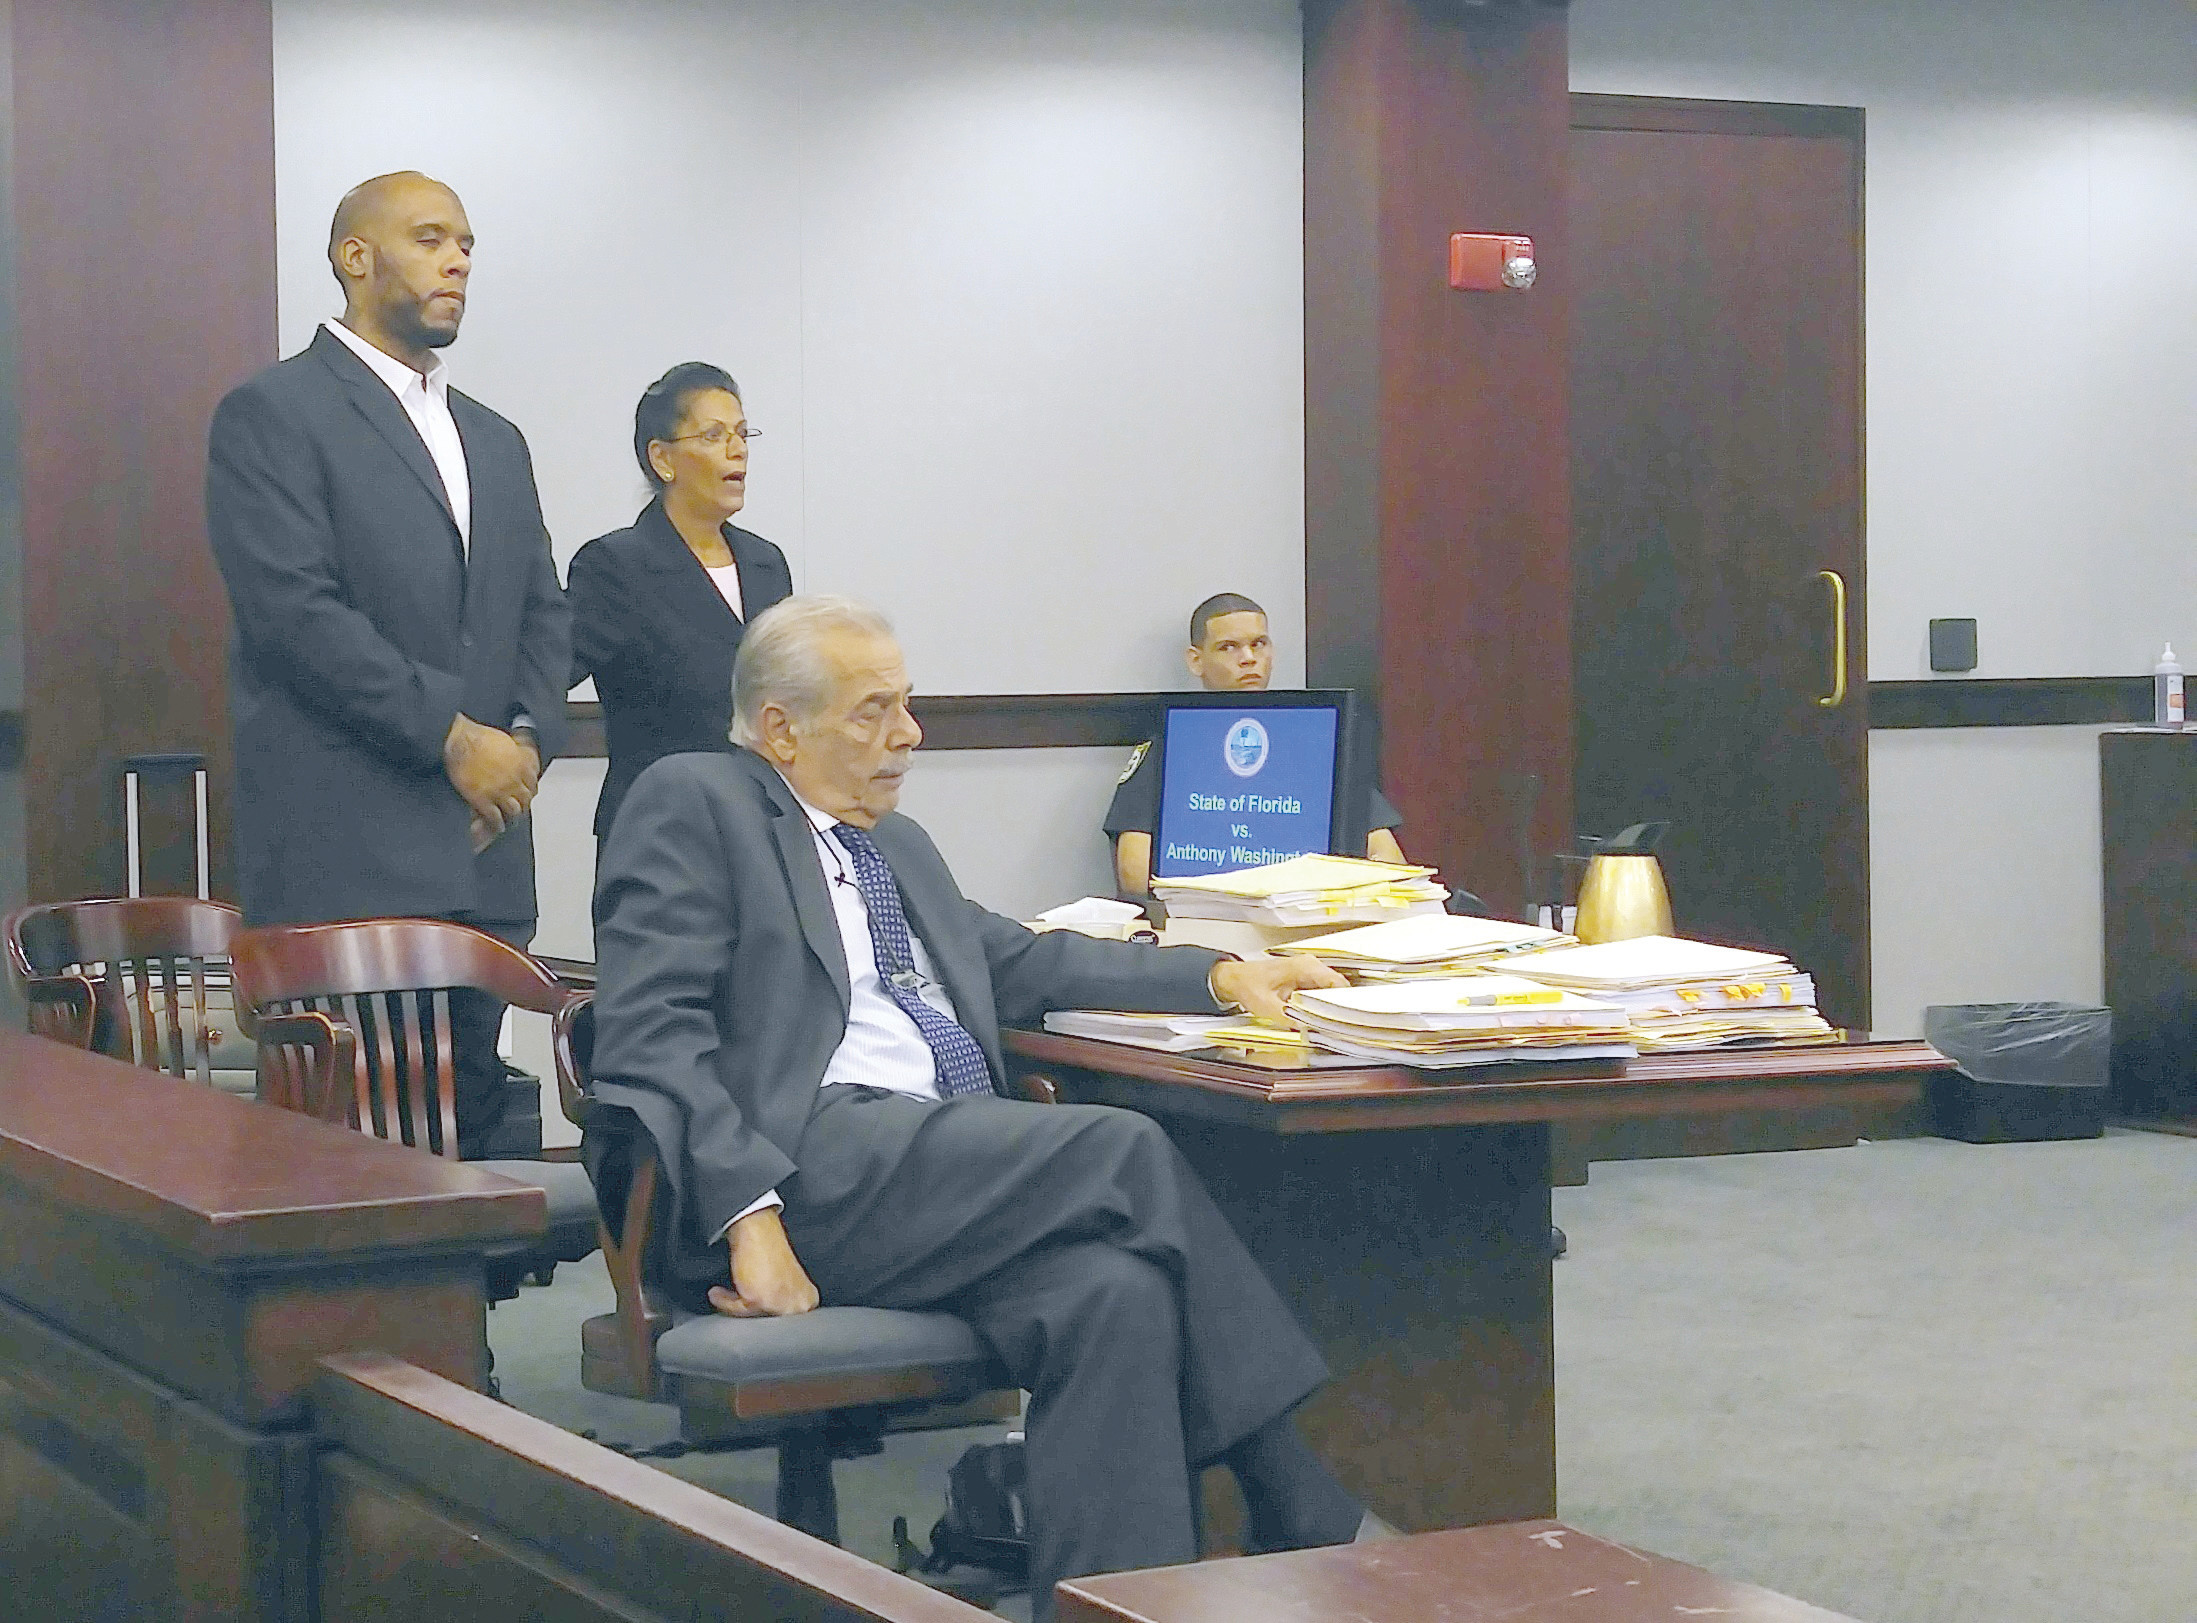 Defendant Anthony Washington (left) stands in court alongside his attorneys, Janis Warren and Tom Fallis.